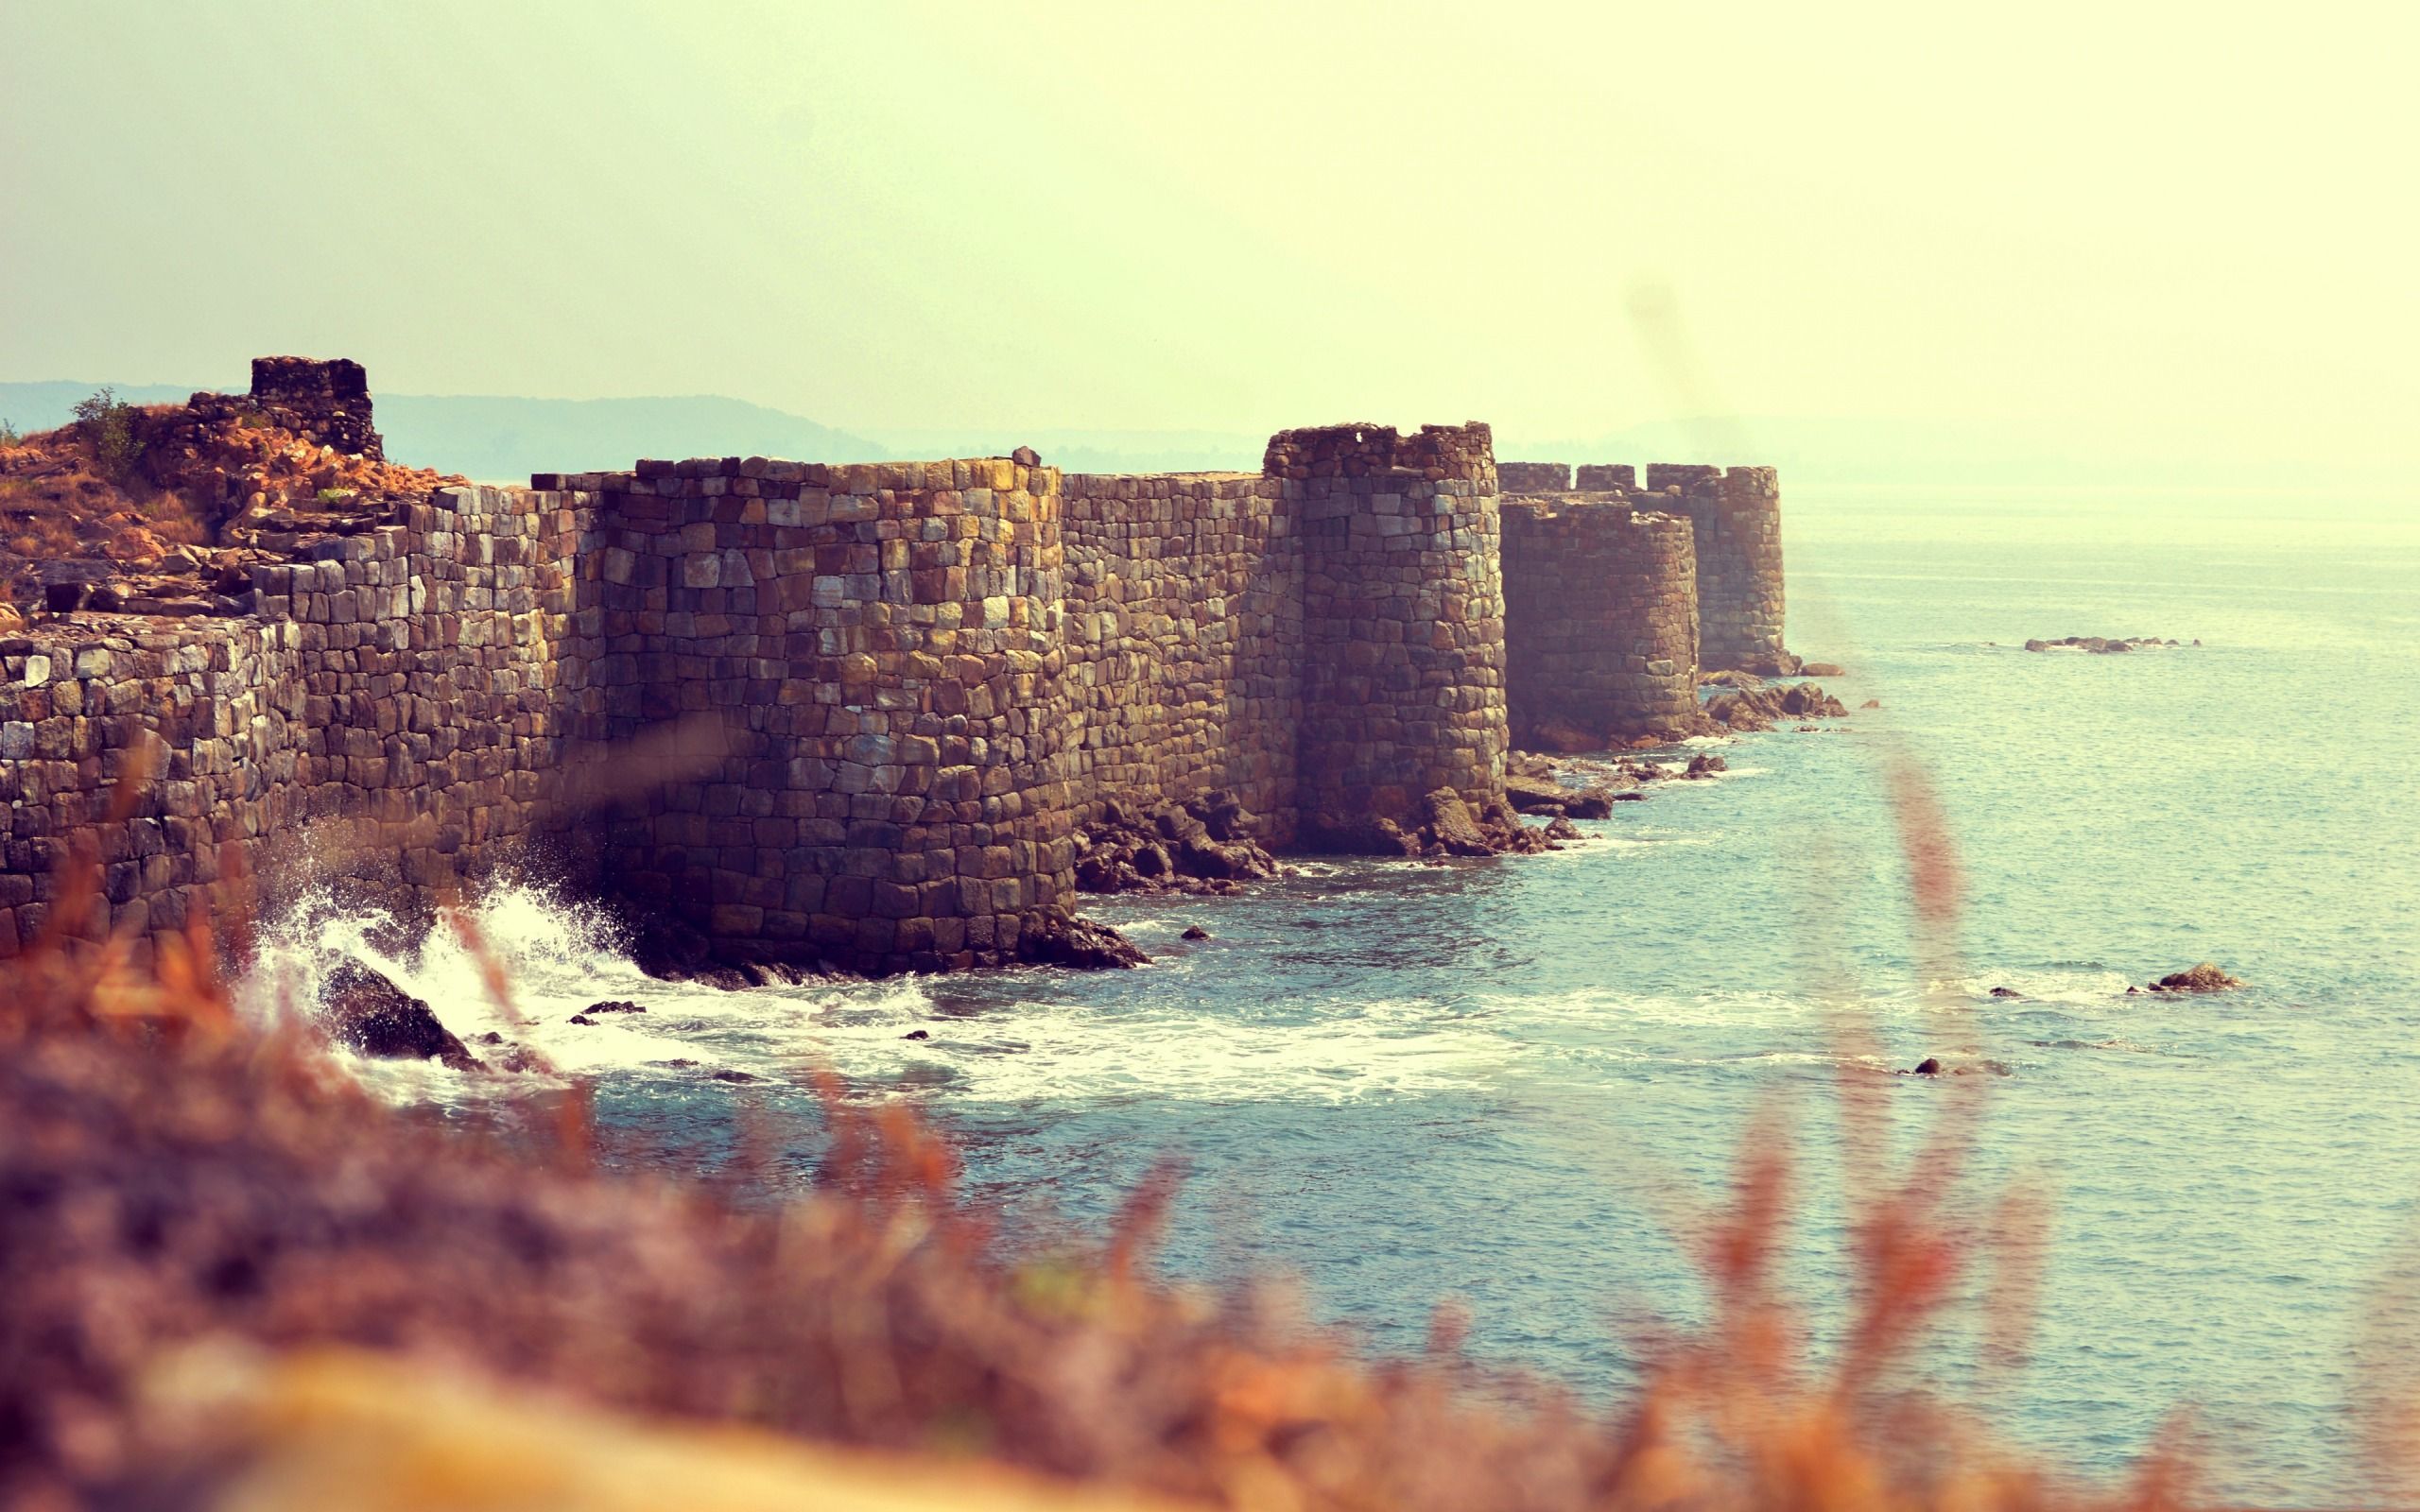 Download wallpaper Sindhudurg Fort, old fortification, coast, Arabian Sea, Indian Ocean, Maharashtra, India for desktop with resolution 2560x1600. High Quality HD picture wallpaper